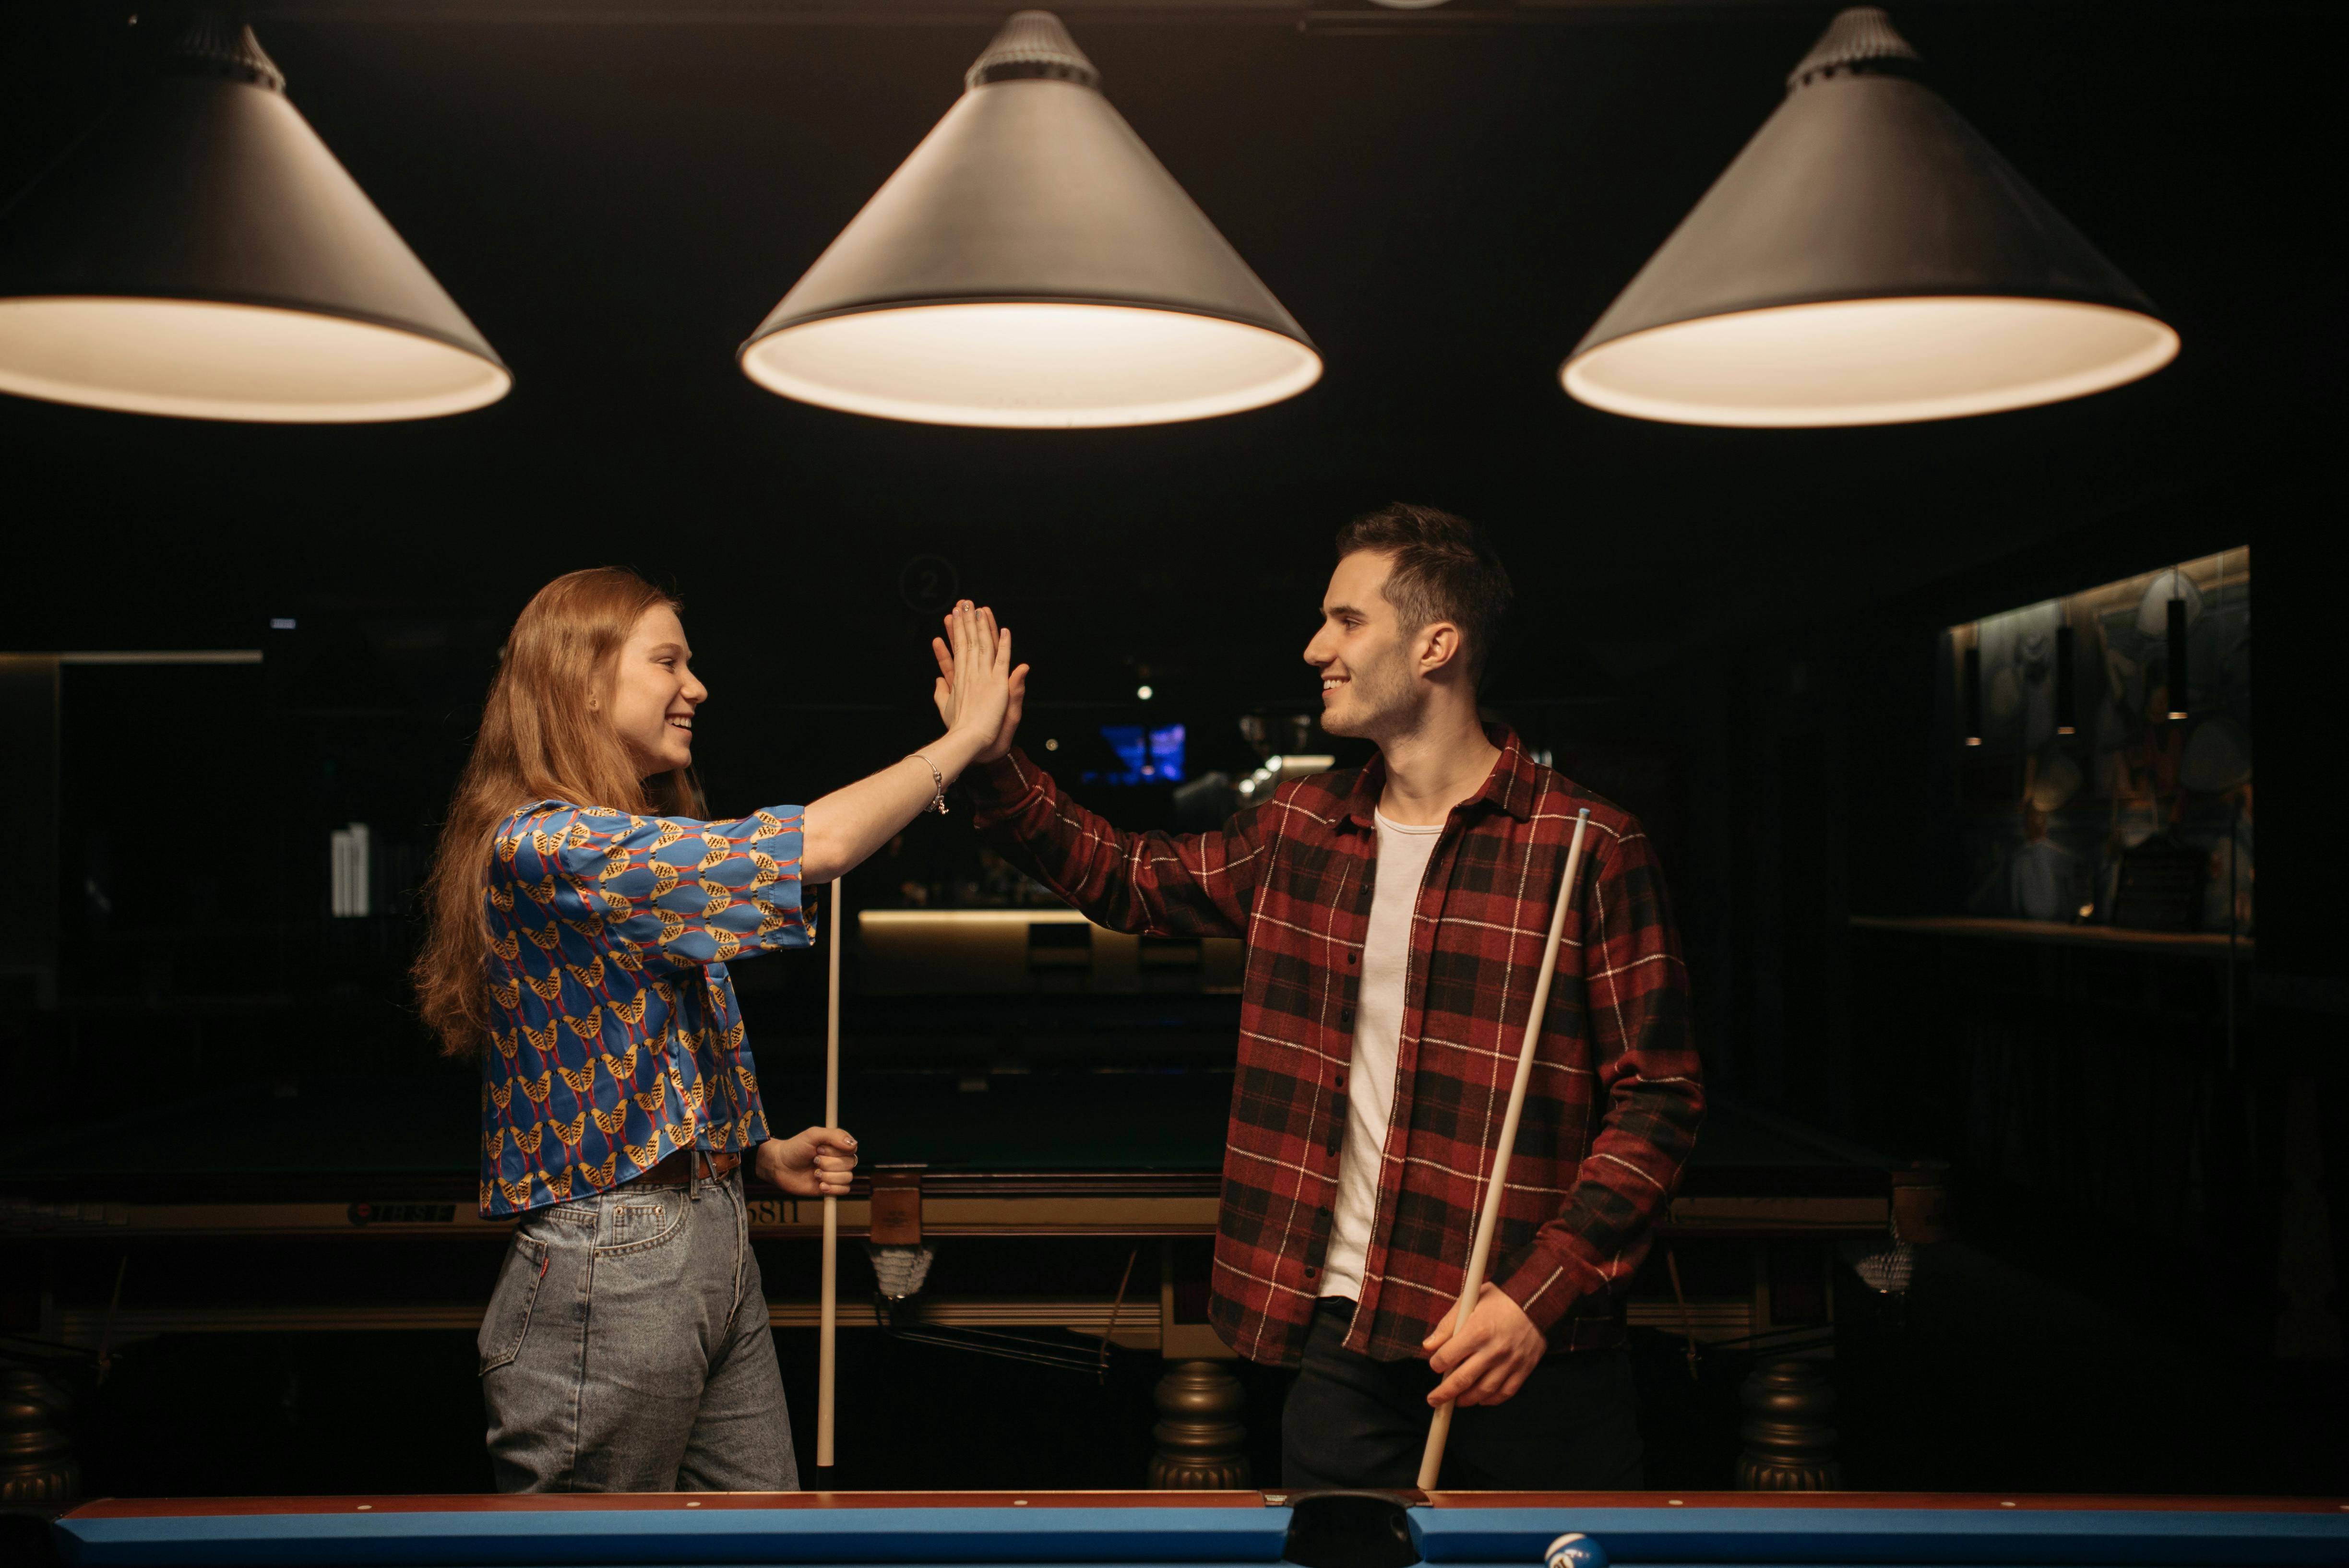 A man and woman high-fiving near a pool table | Source: Pexels